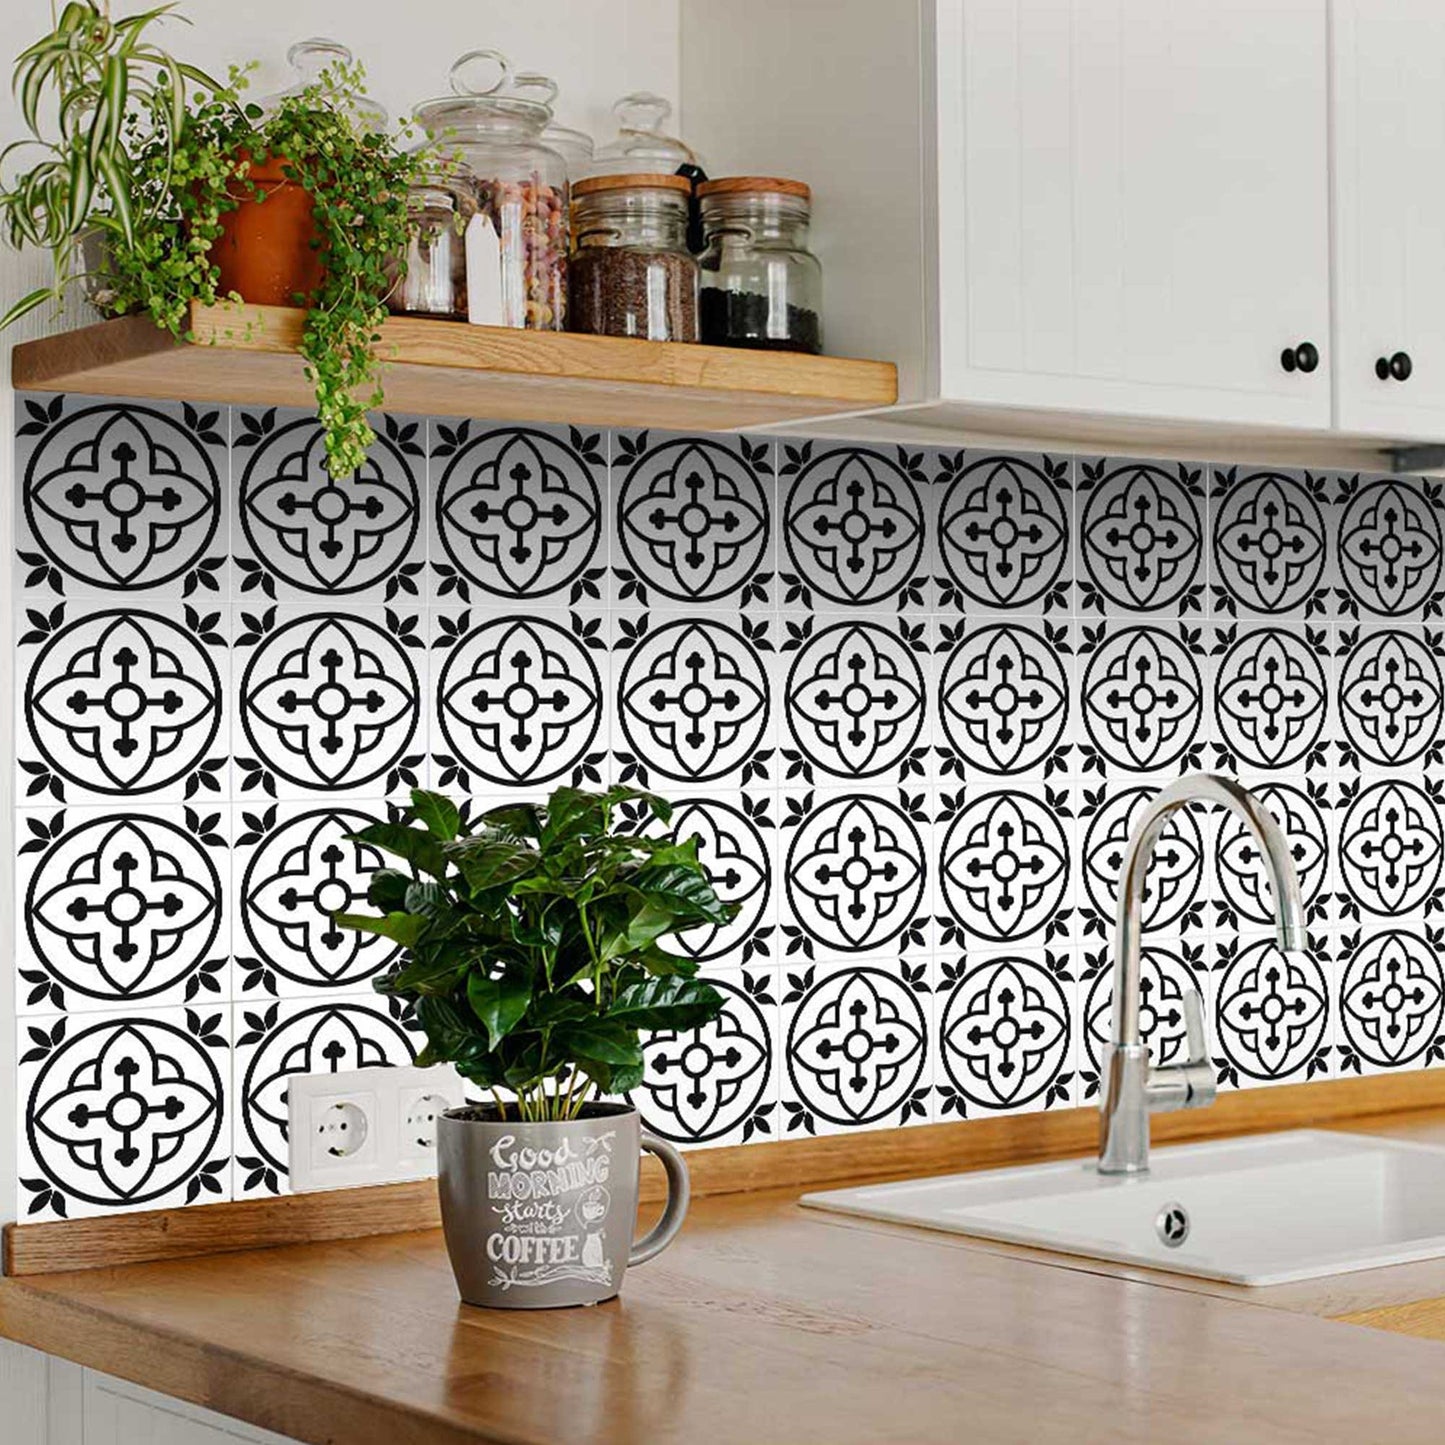 4" X 4" Black and White Peel and Stick Removable Tiles